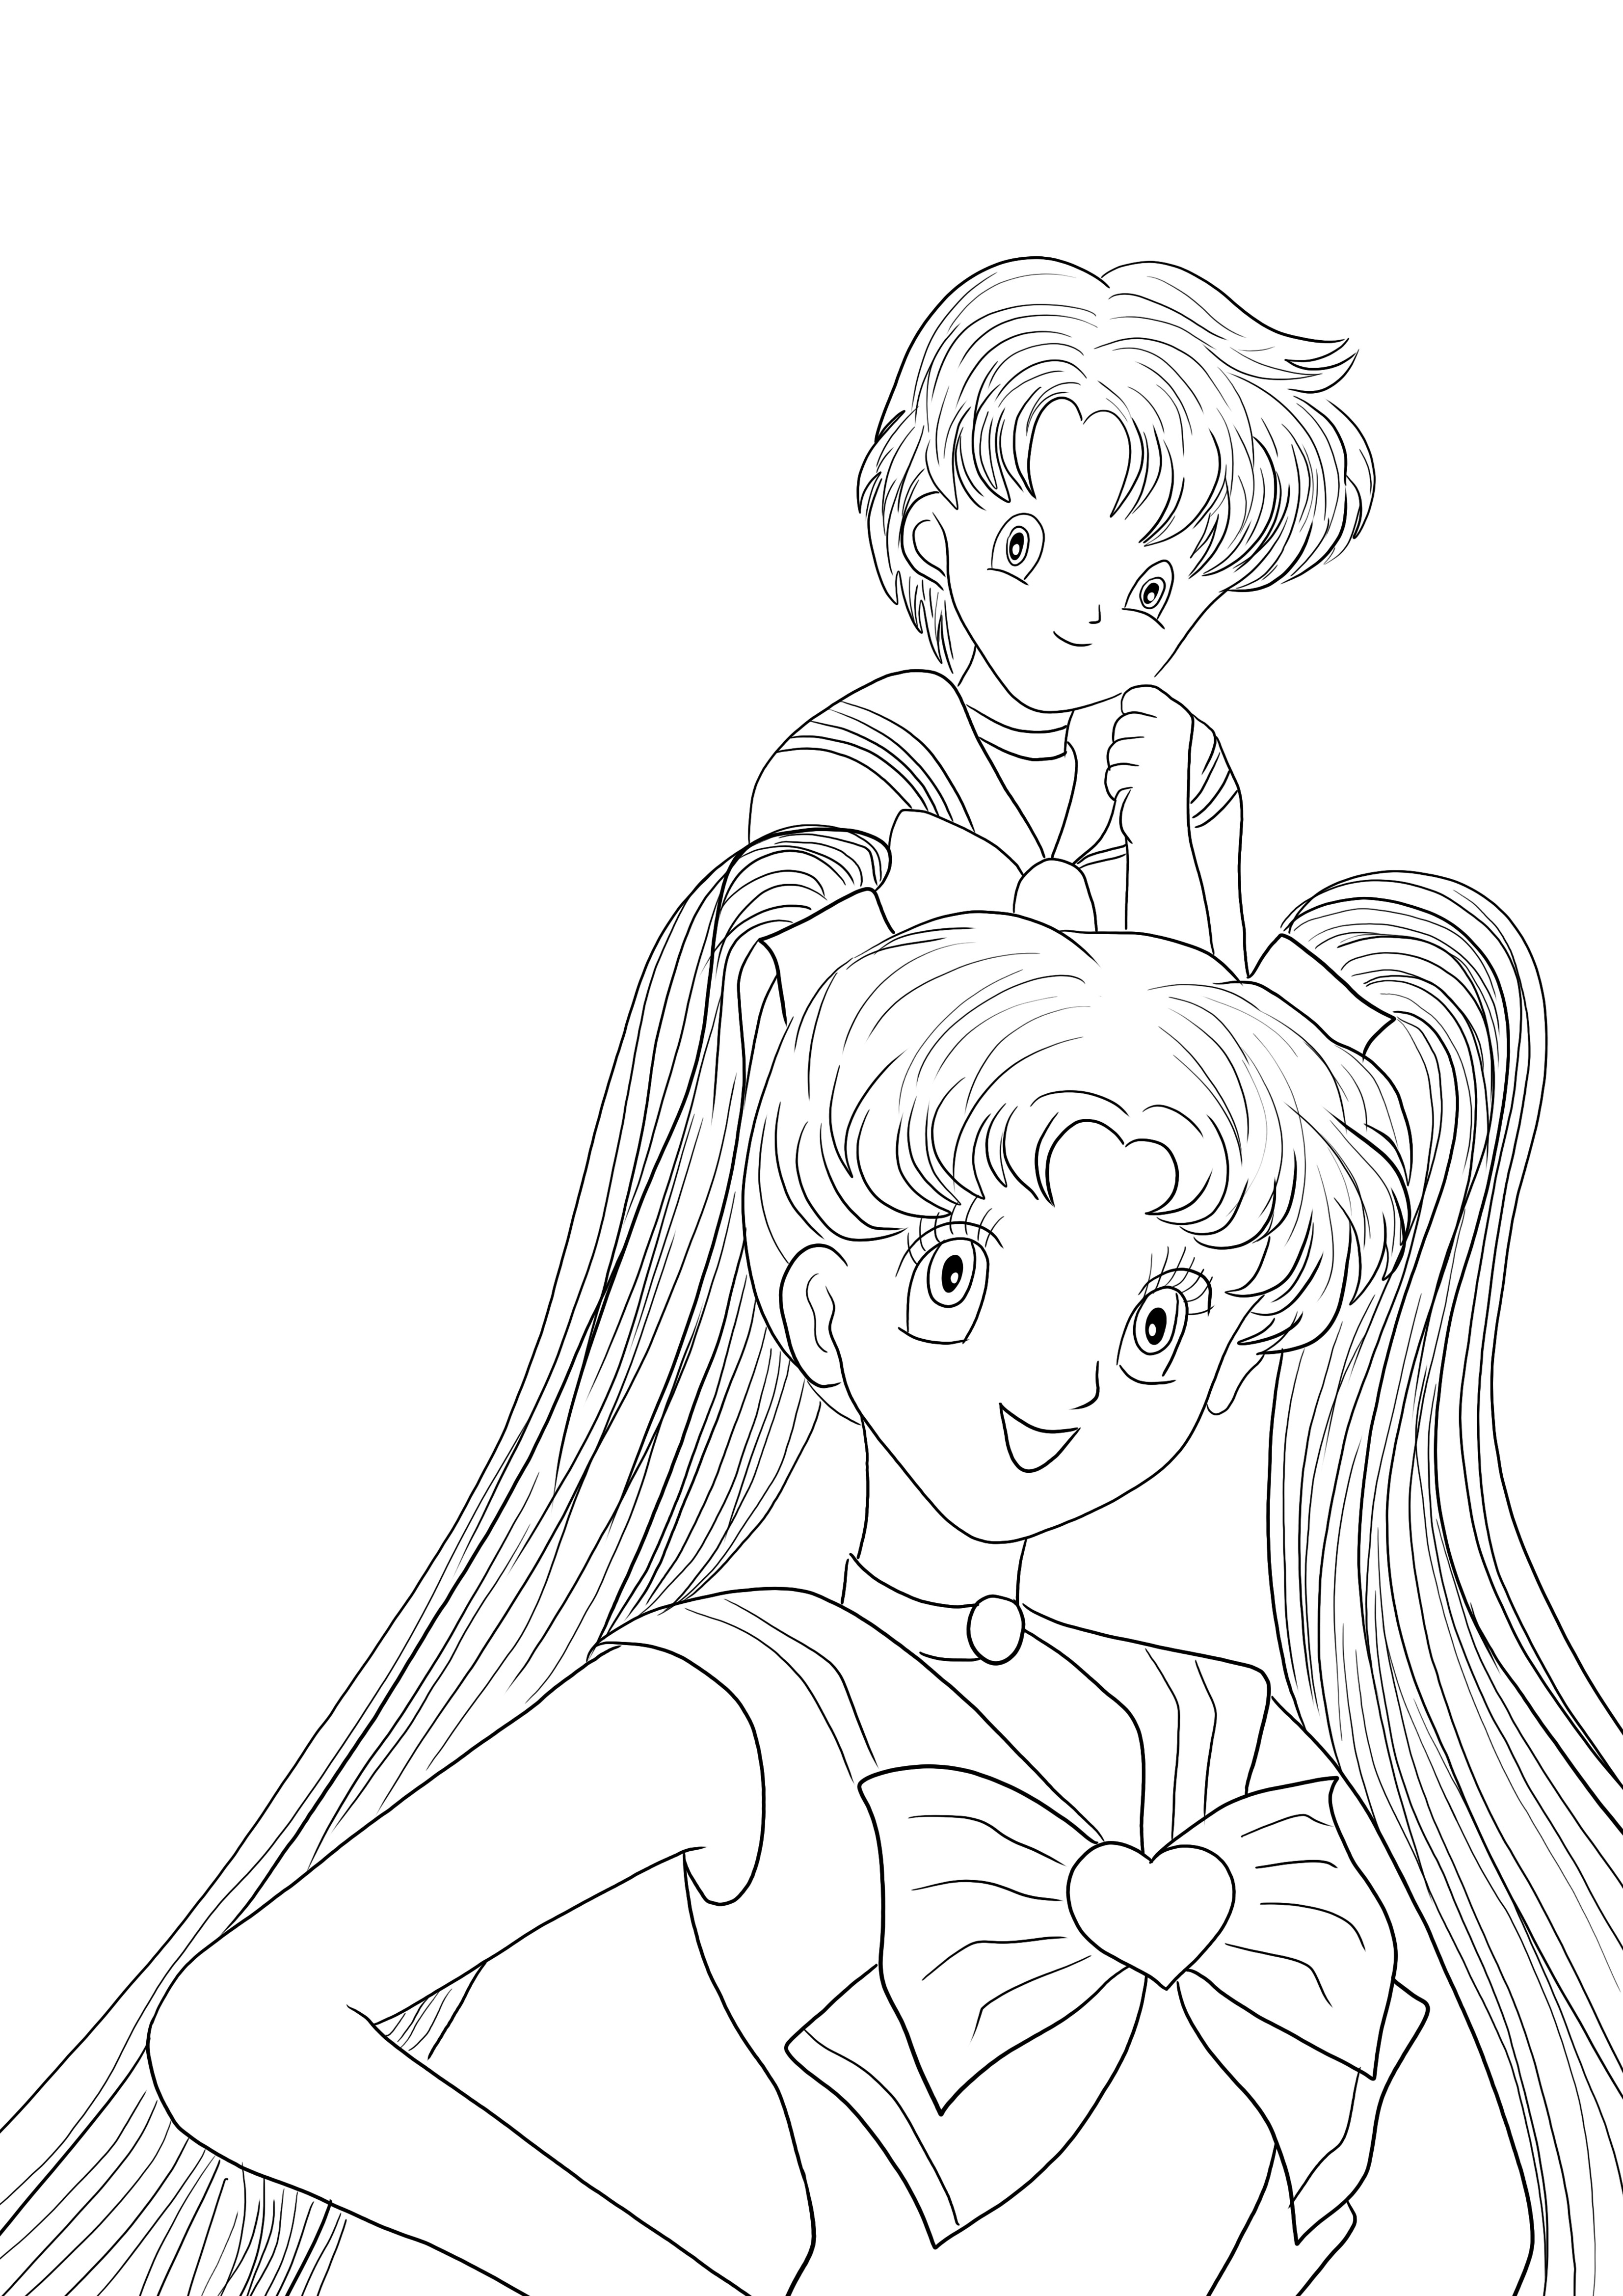 Here is a free-to-download Sailor Moon Girls coloring sheet to color by children